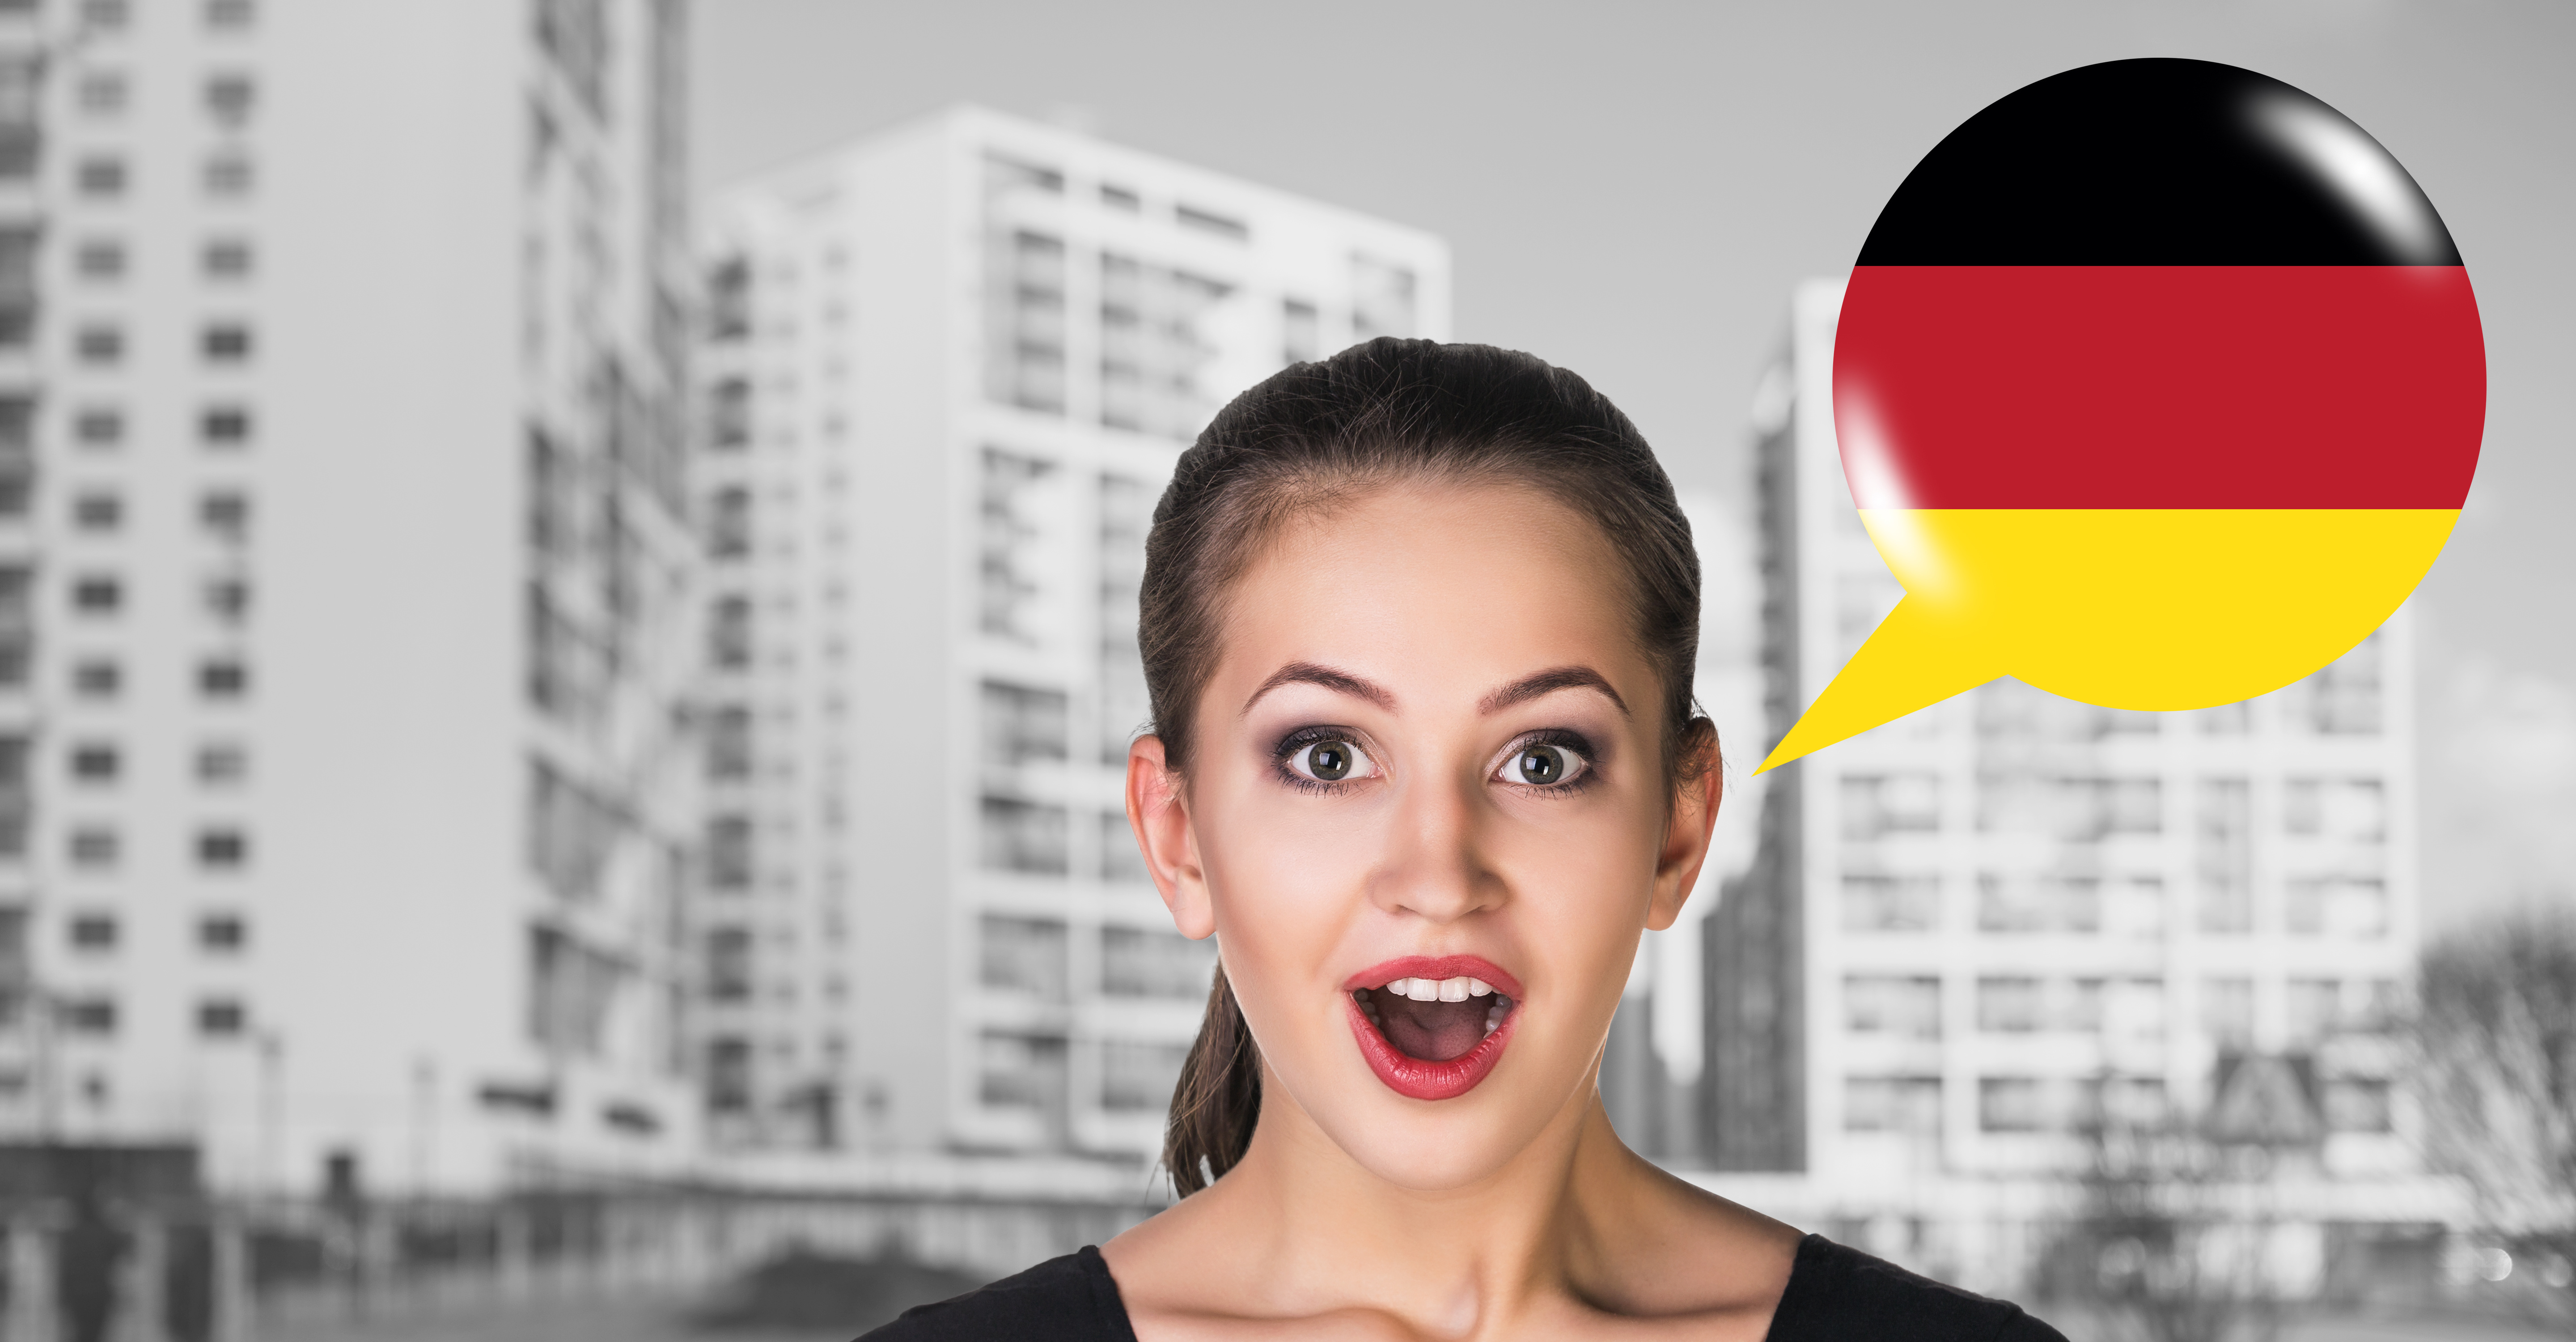 Why tone matters: making the right impression in German markets